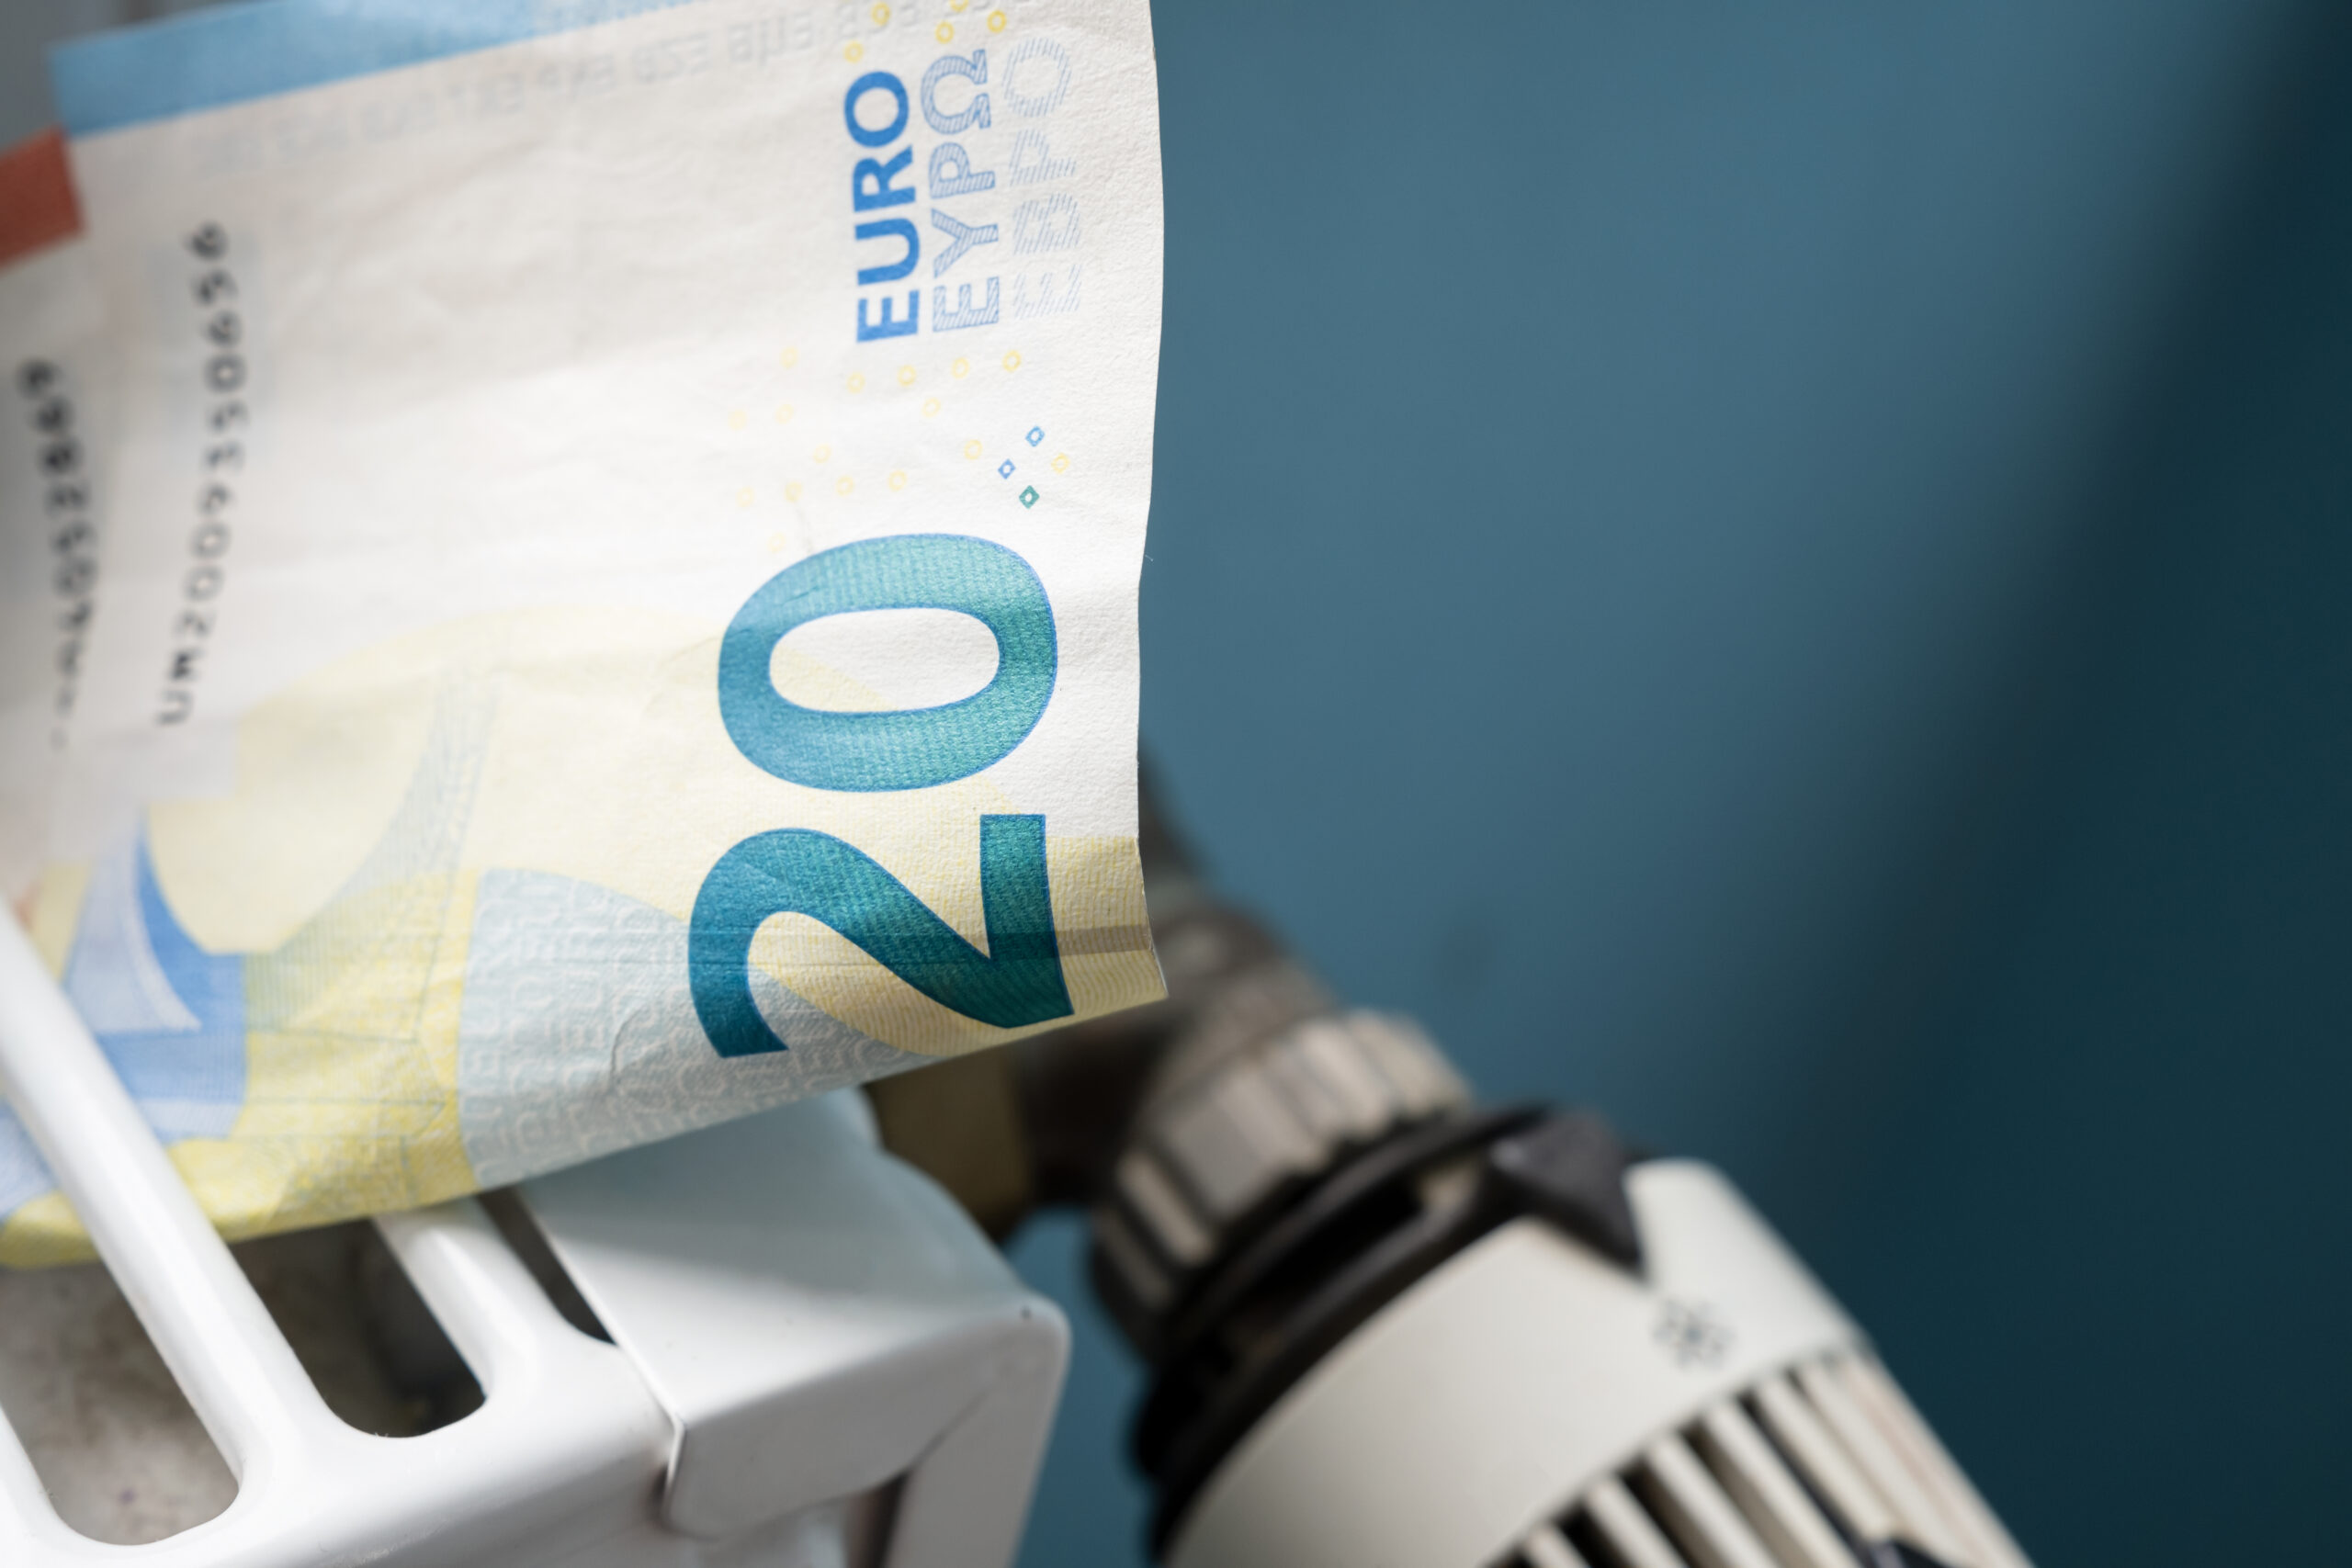 euro banknotes in a radiator and a thermostat knob at a minimum, close up. concept of energy crisis and expensive heating costs.